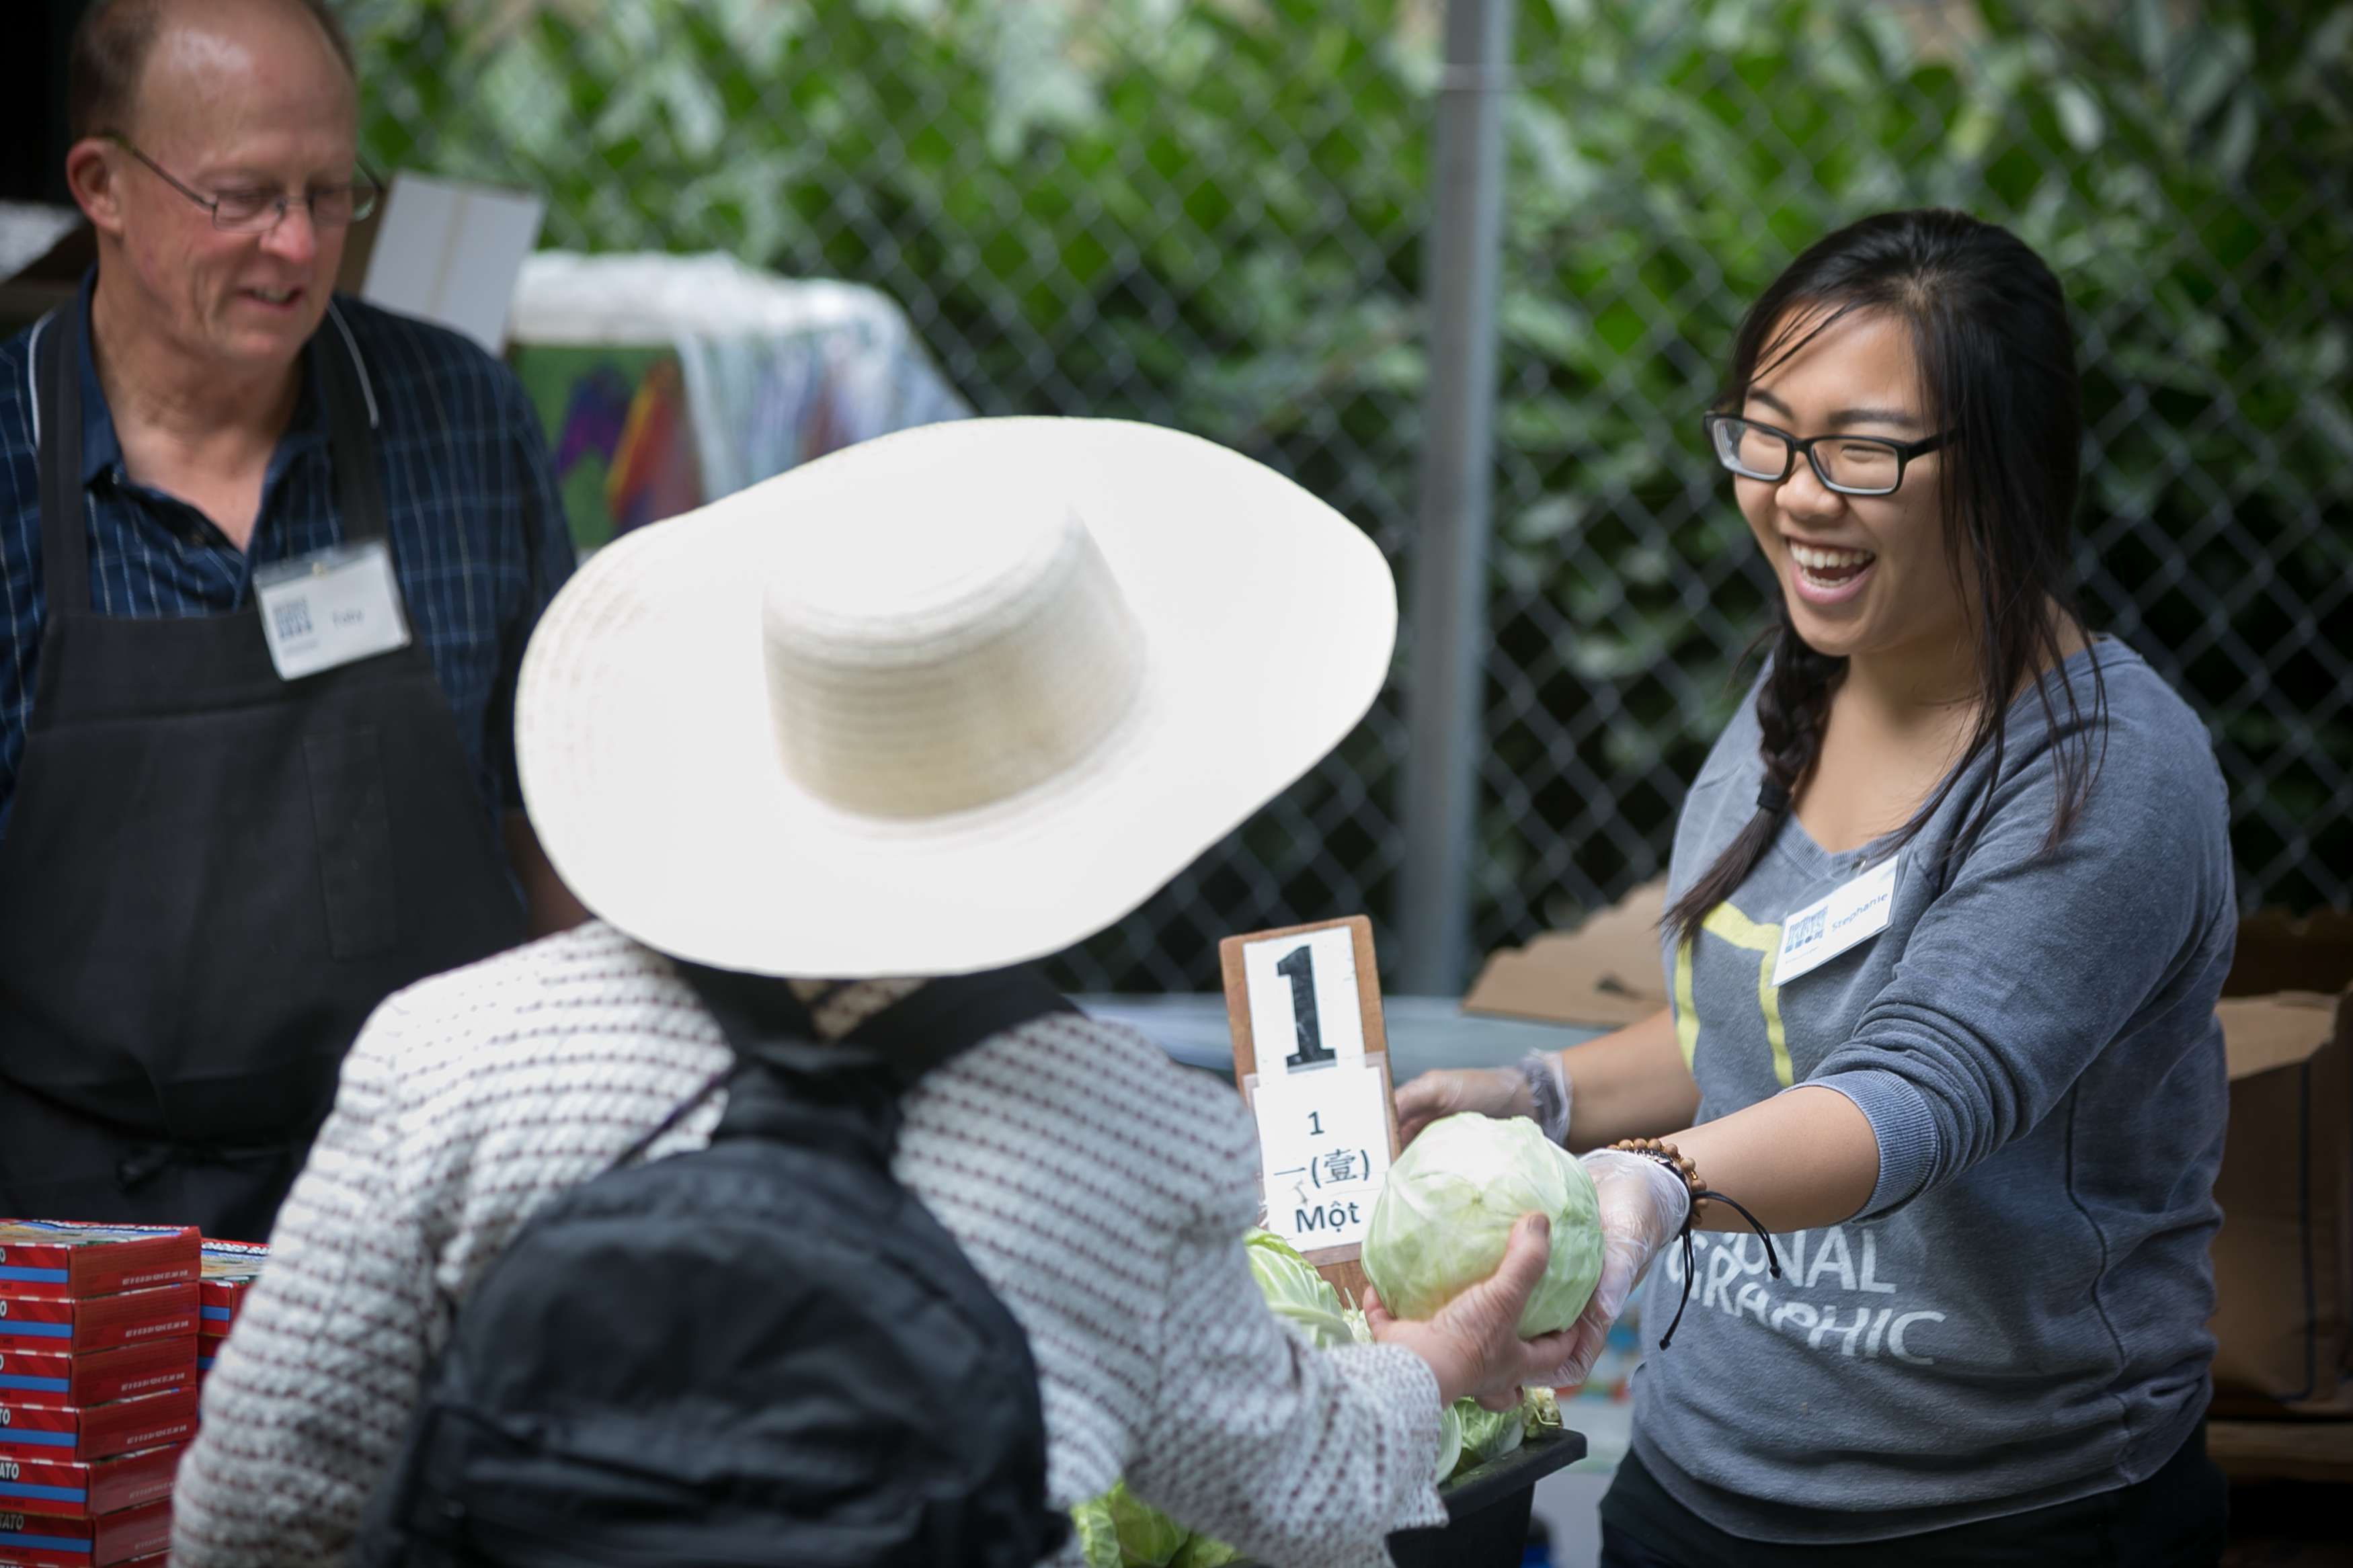 A woman with dark straight hair wearing glasses hands a vegetable to a woman wearing a straw hat at a produce line.